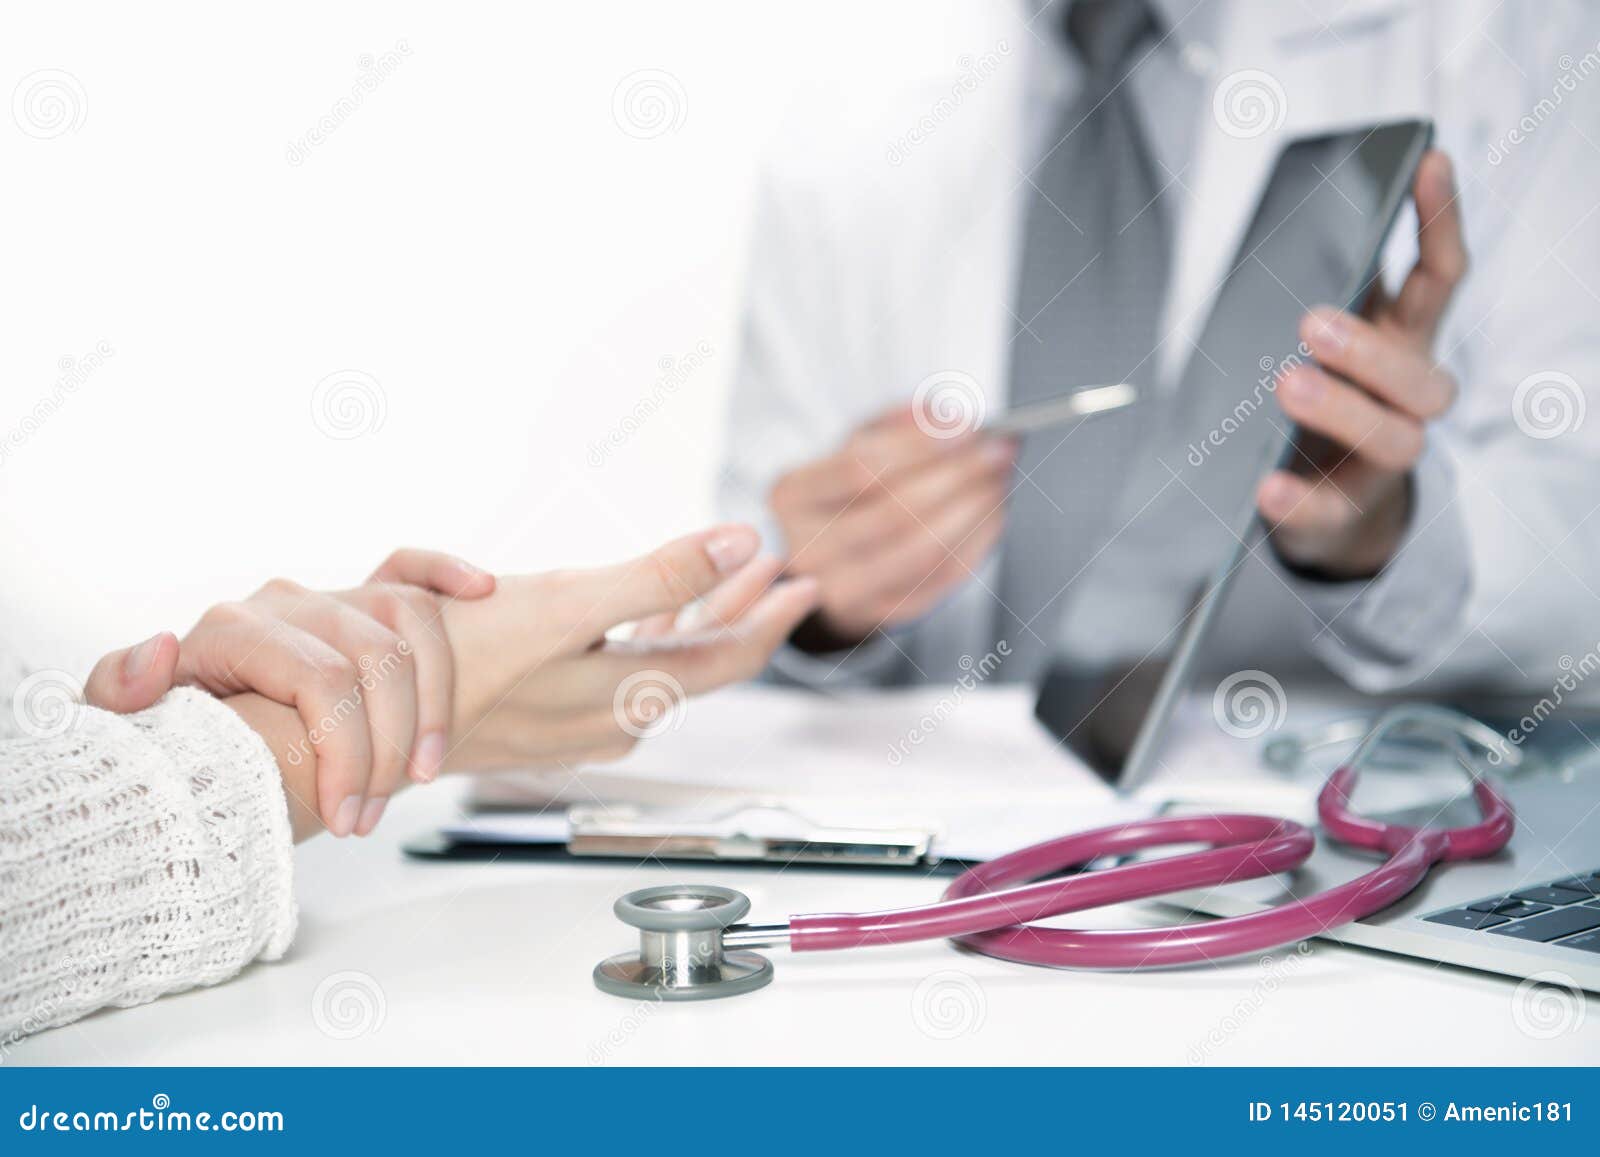 medical doctor and patient discussing and consulting in hospital examination room